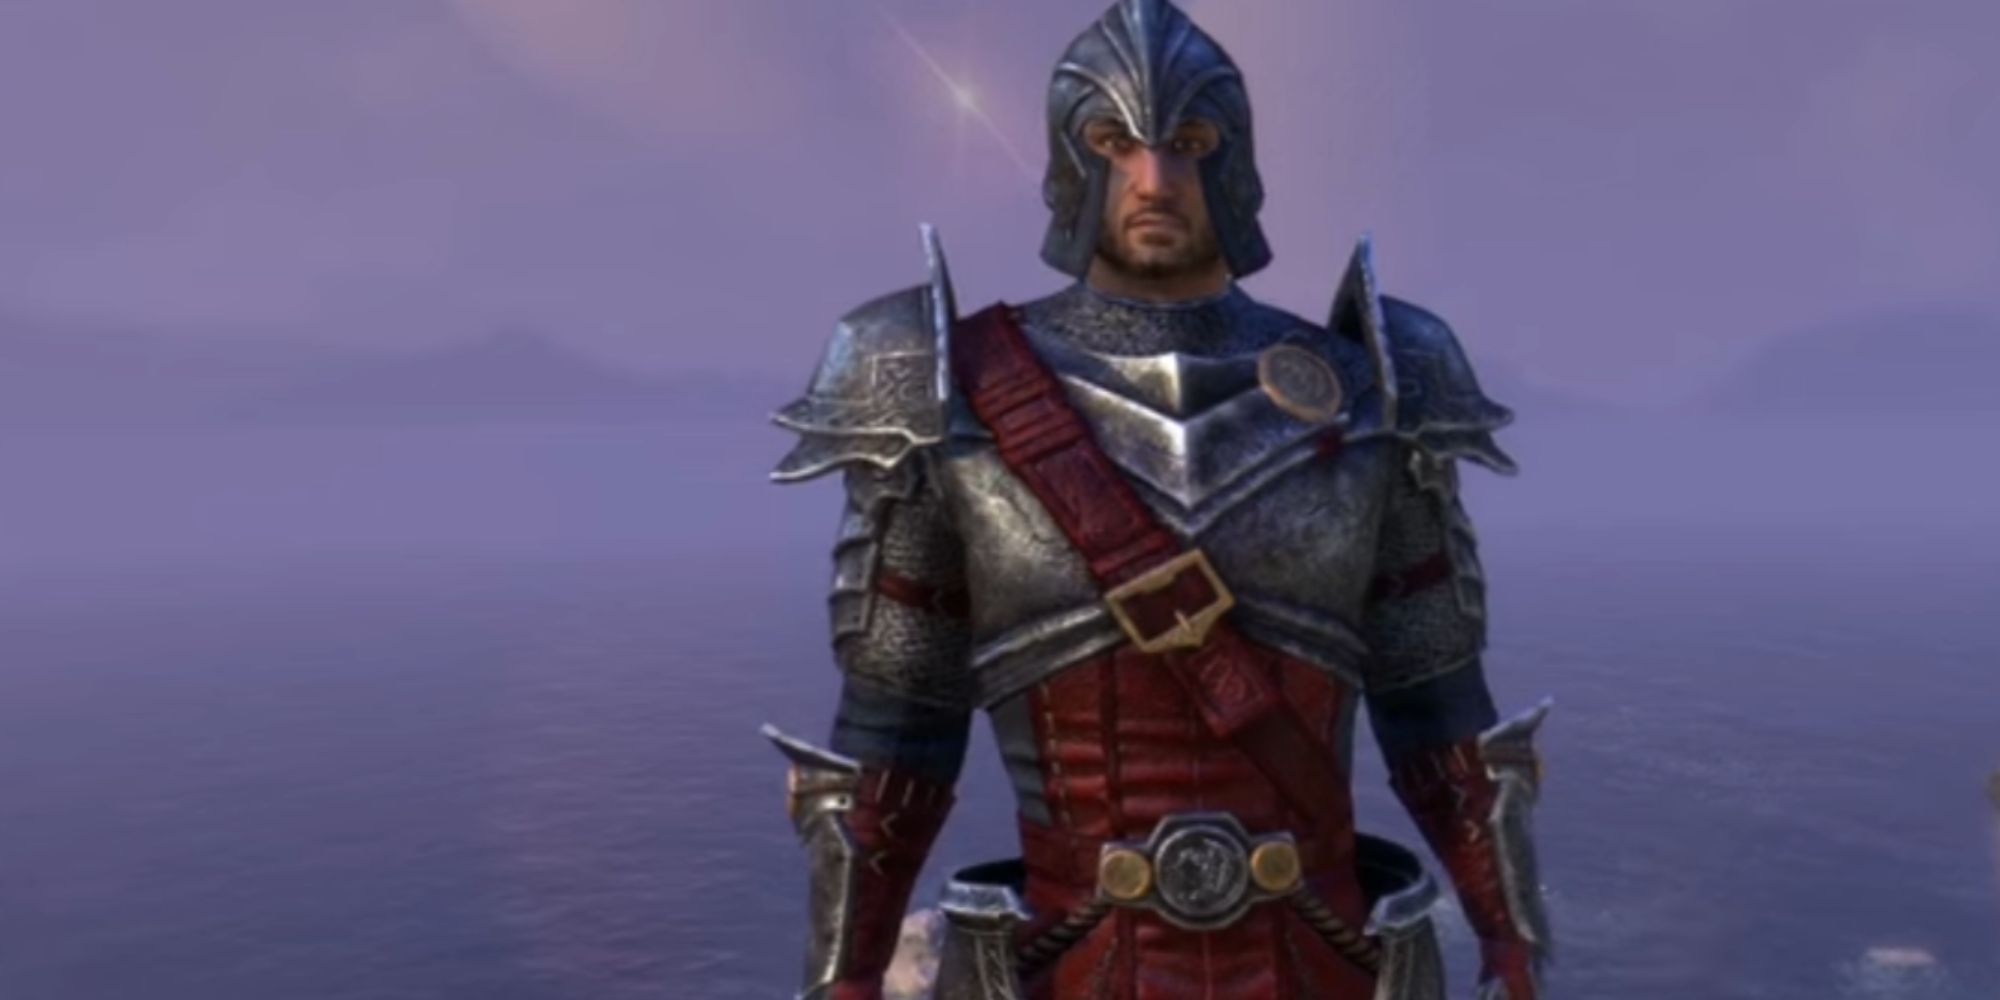 ESO Character Wearing The Systres Guardian Heavy Armor